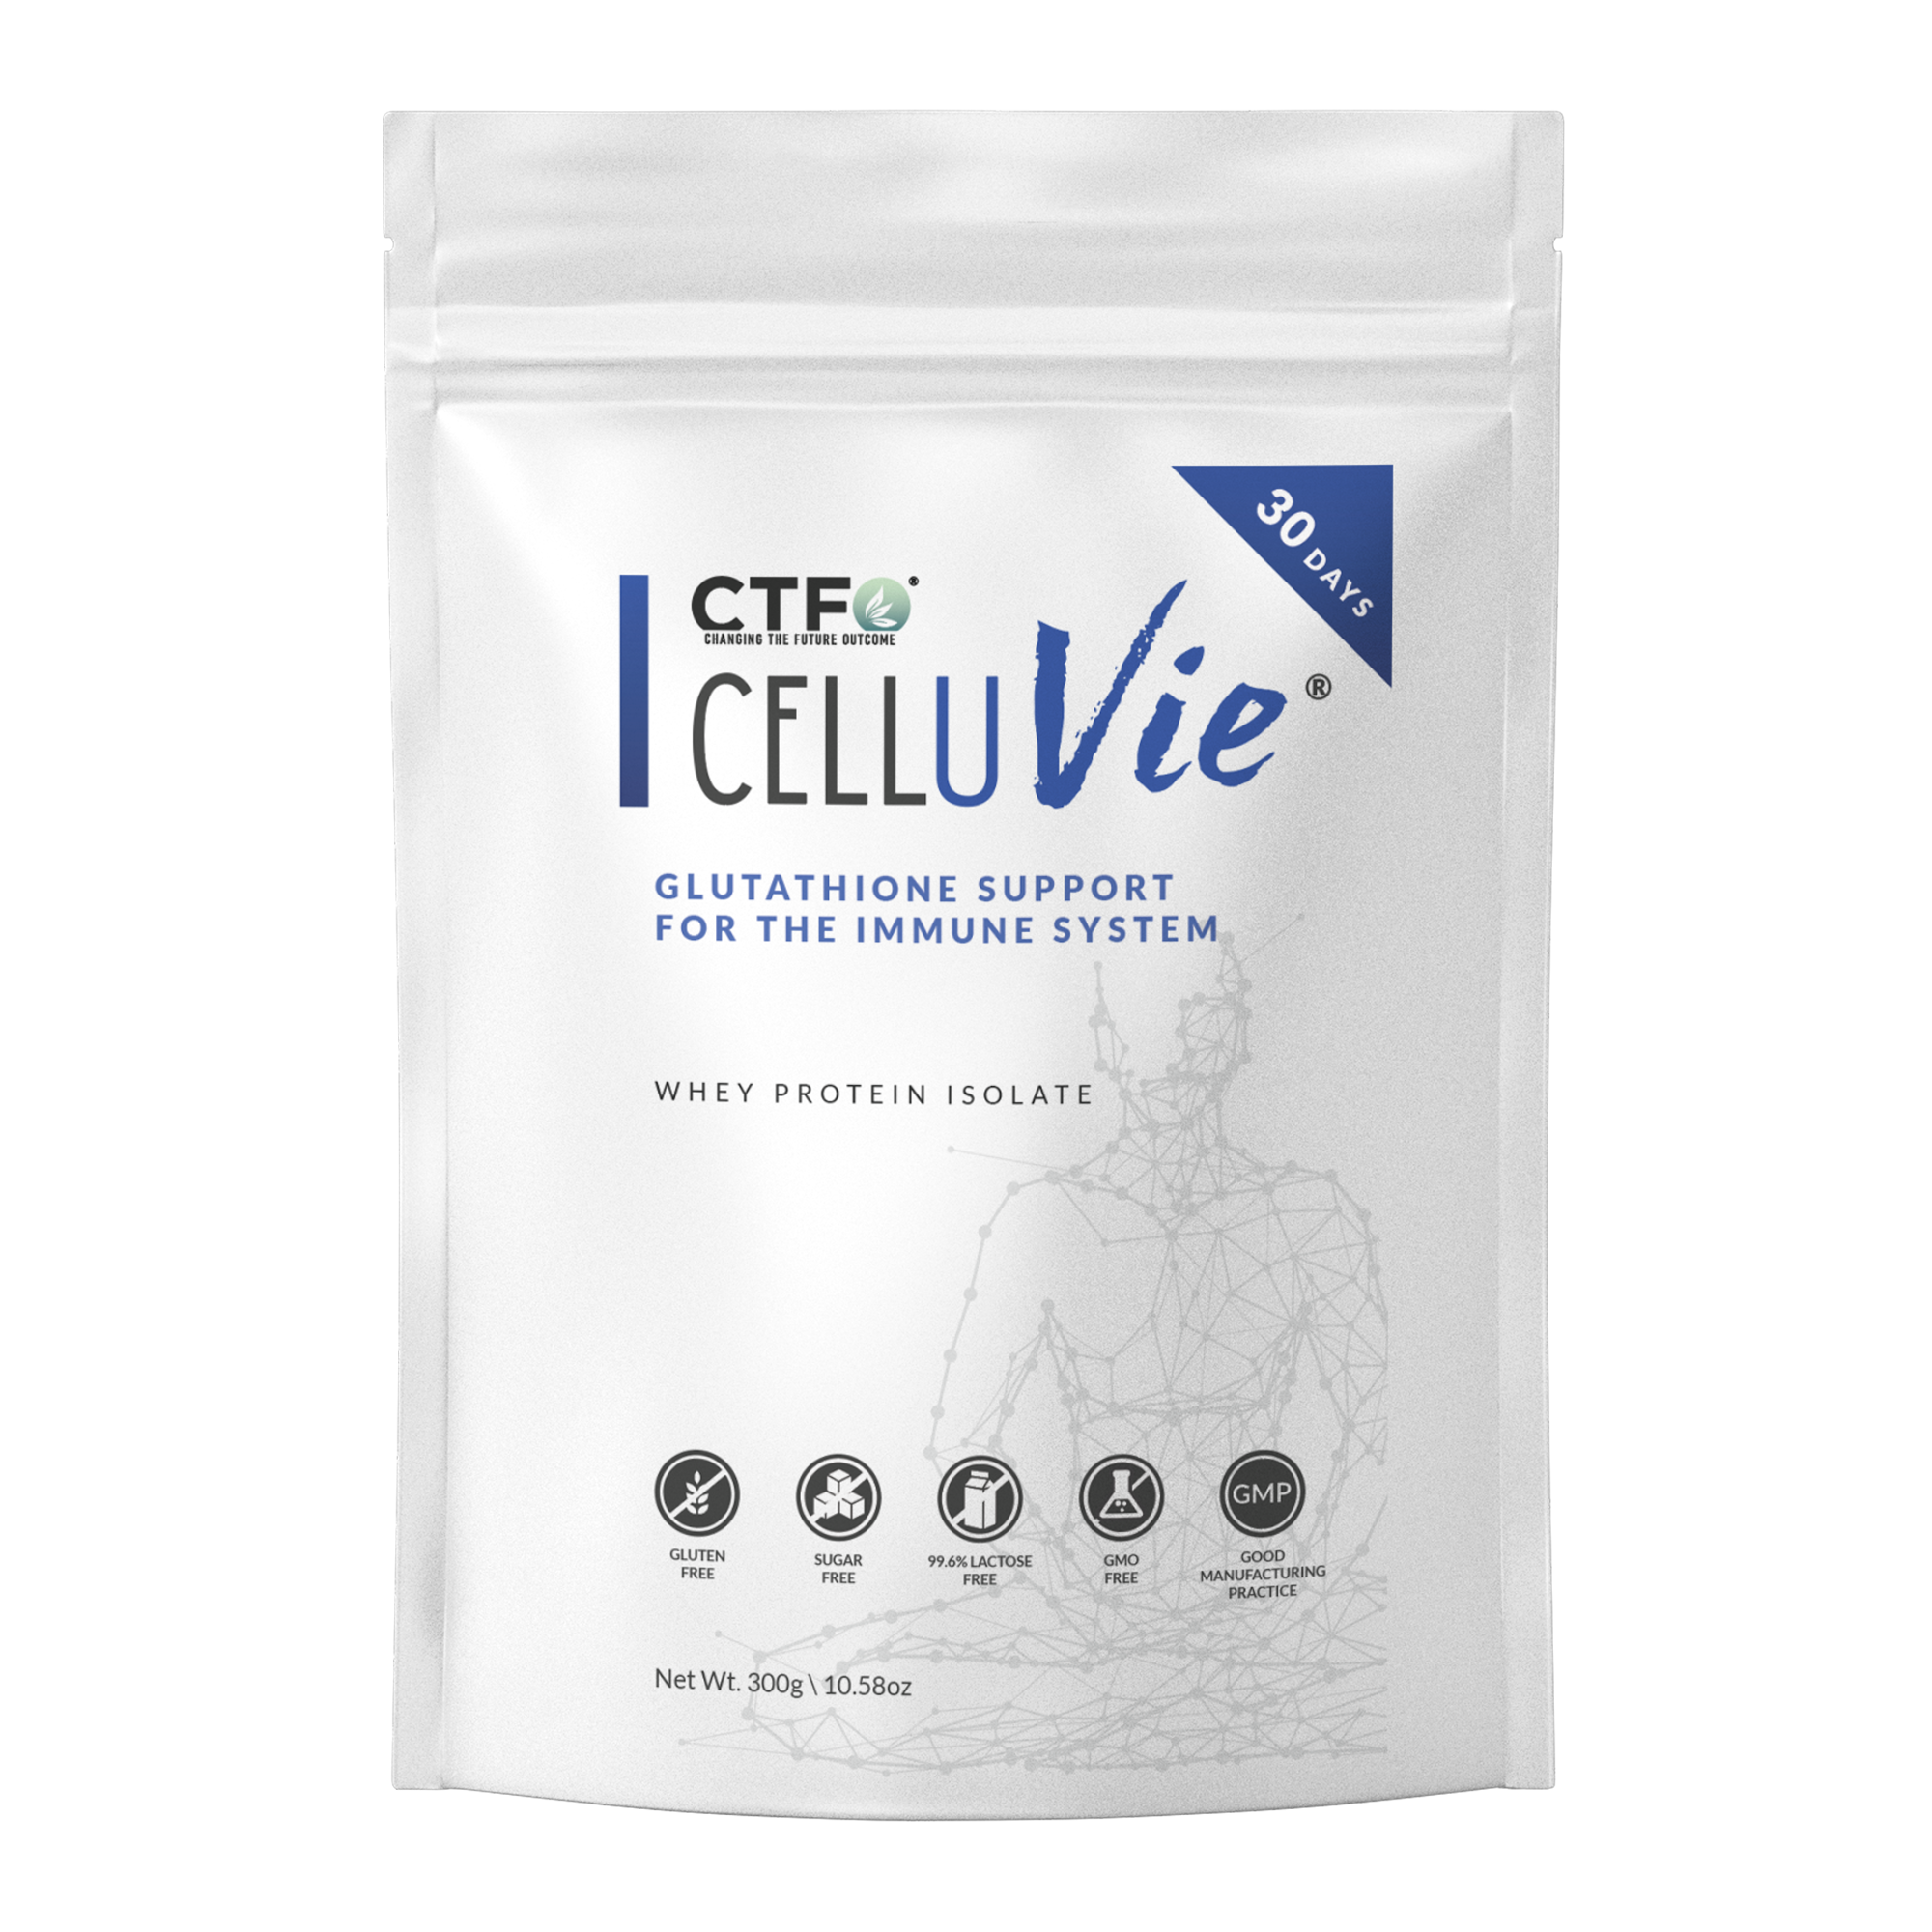 CelluVie product